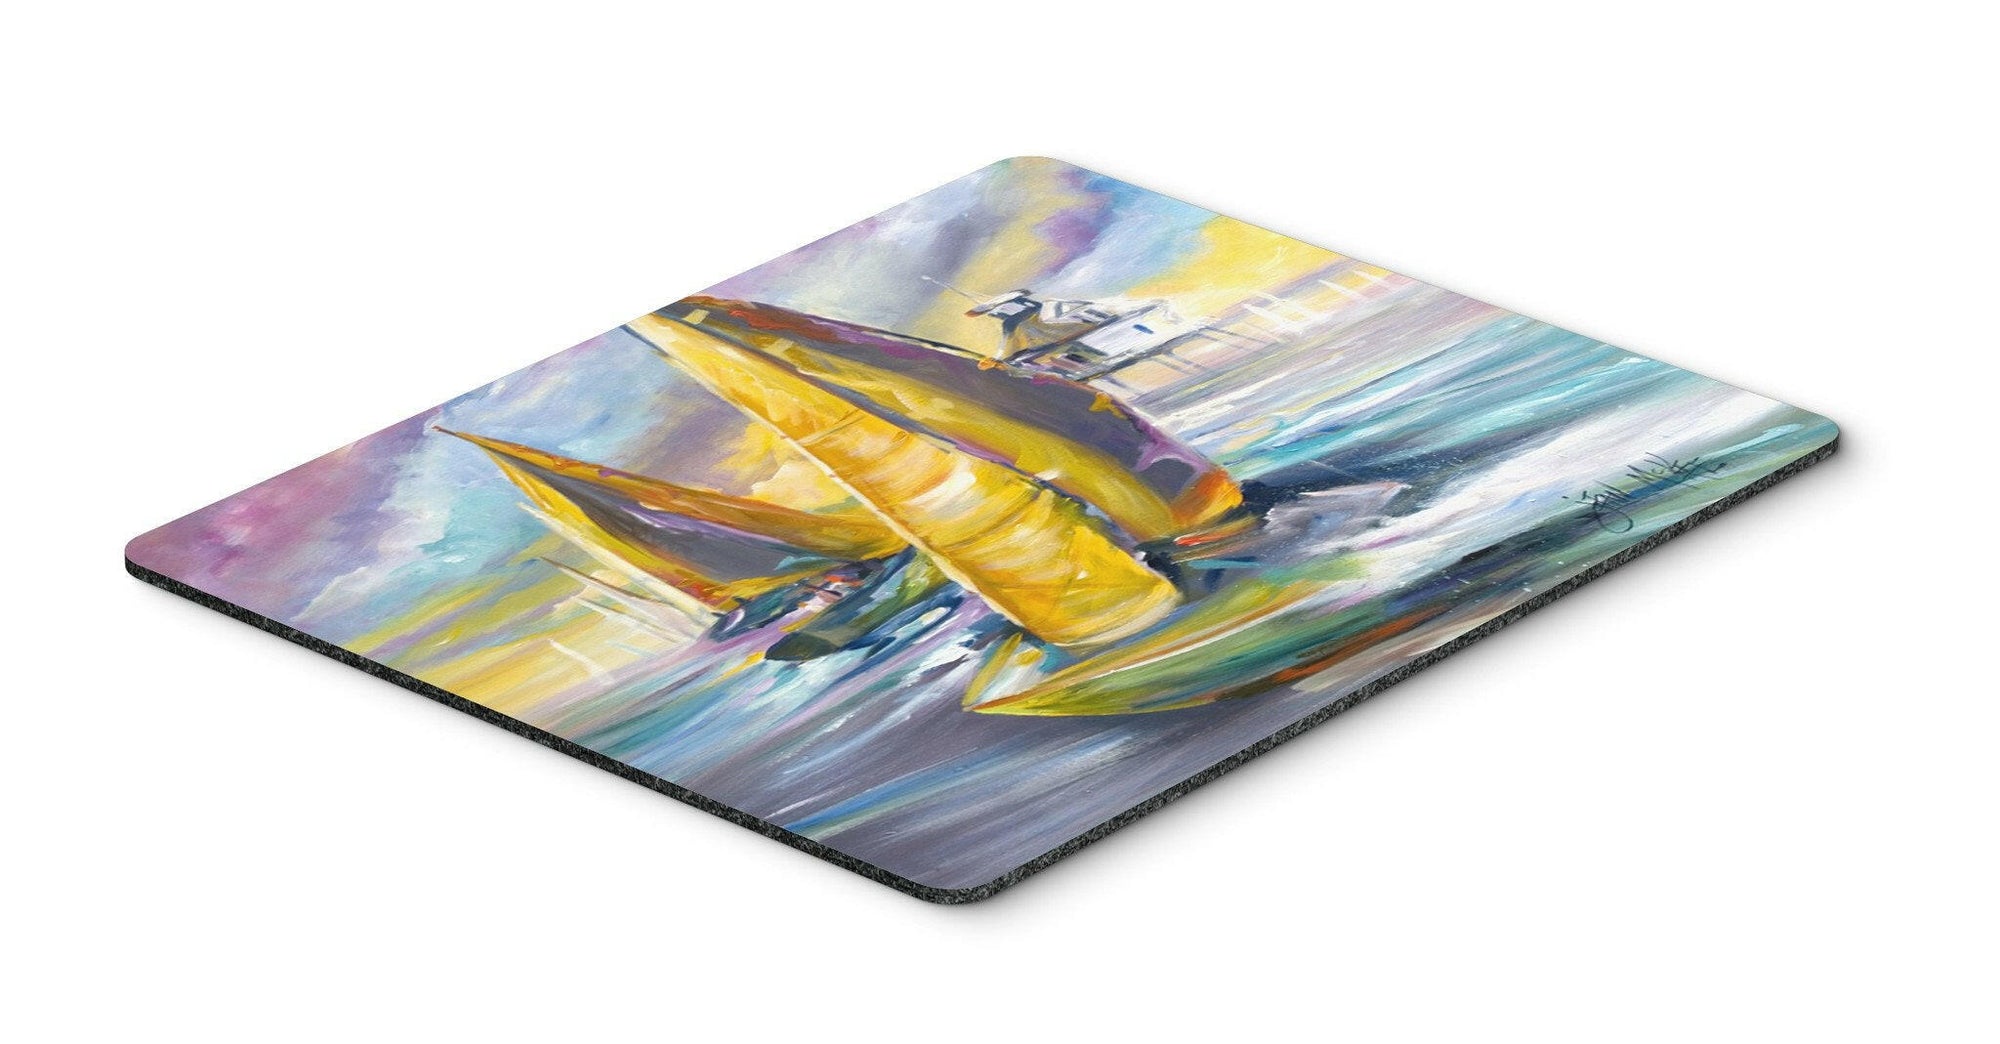 Sailboat with Middle Bay Lighthouse Mouse Pad, Hot Pad or Trivet JMK1061MP by Caroline's Treasures